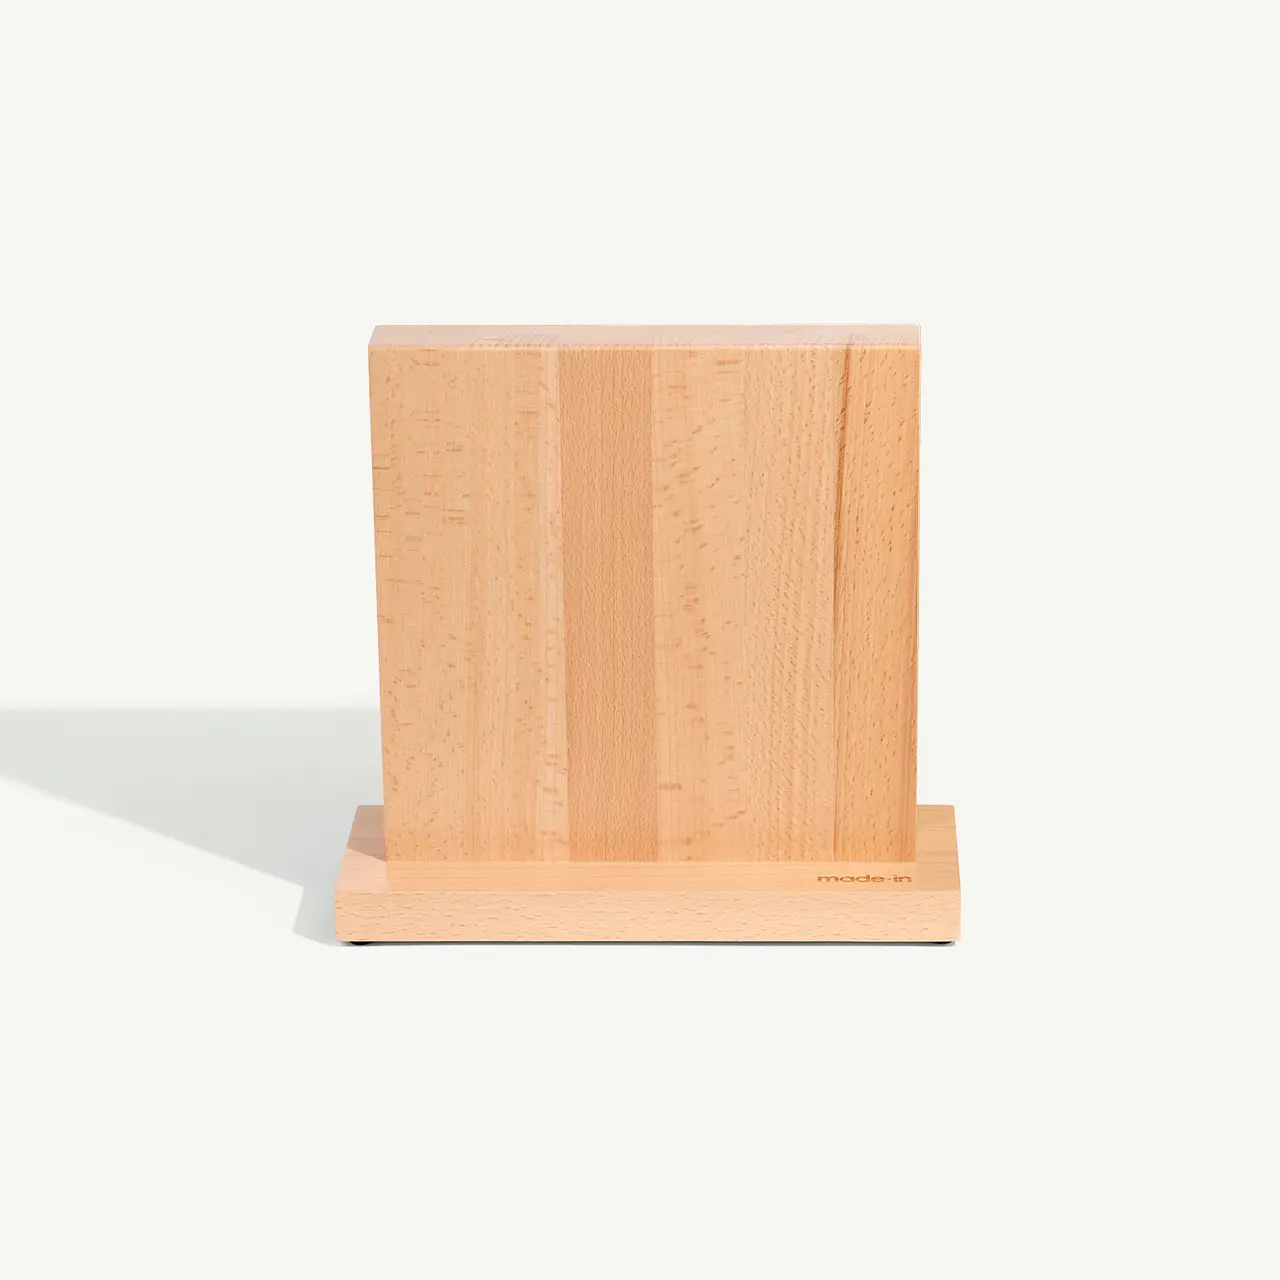 A simple wooden bookend with a vertical piece attached to a flat base, displayed against a white background.